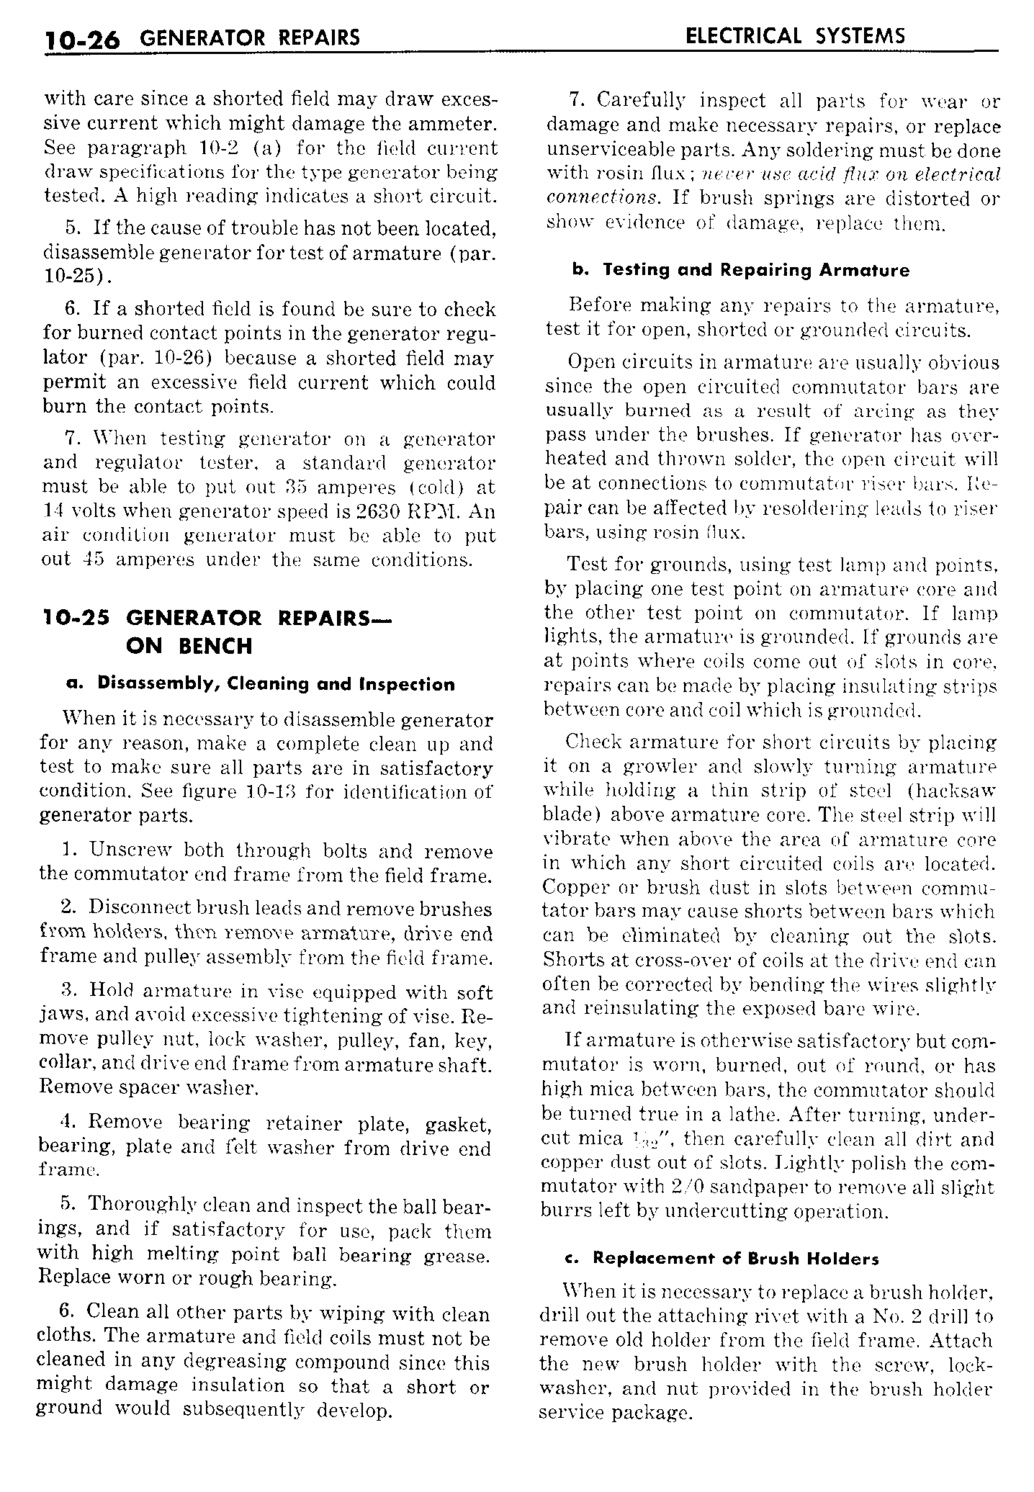 n_11 1959 Buick Shop Manual - Electrical Systems-026-026.jpg